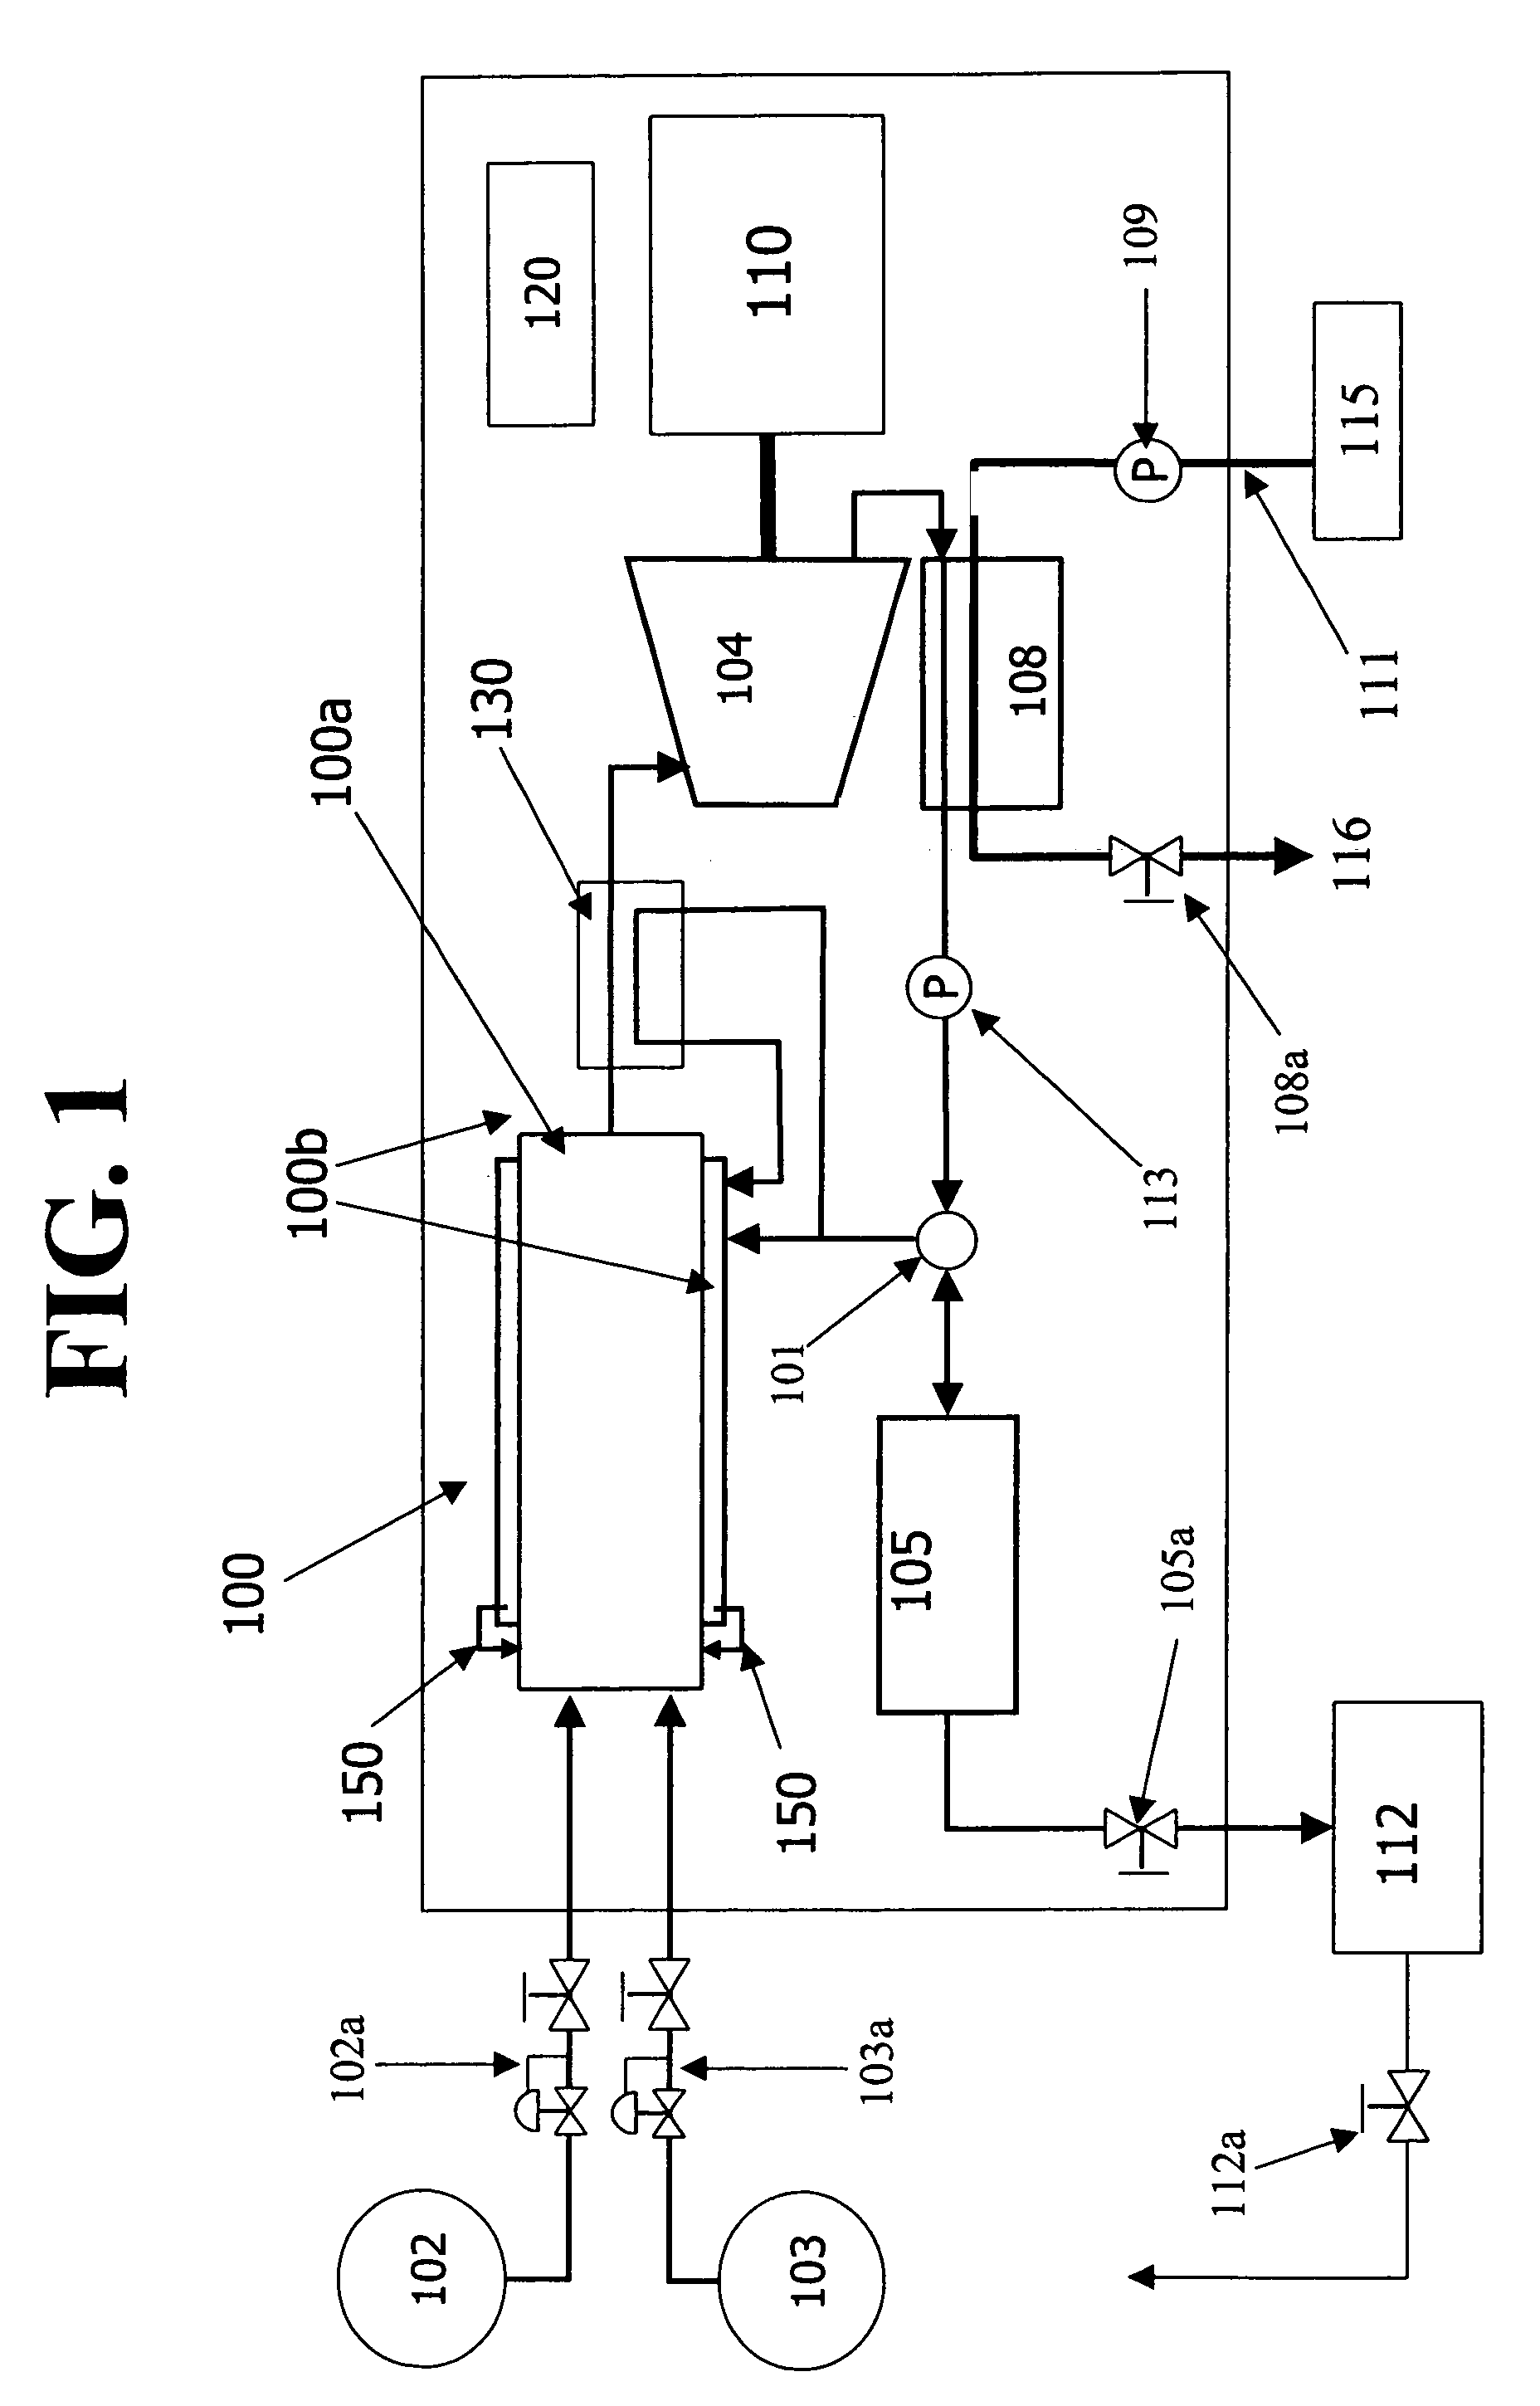 Closed-loop cooling system for a hydrogen/oxygen based combustor